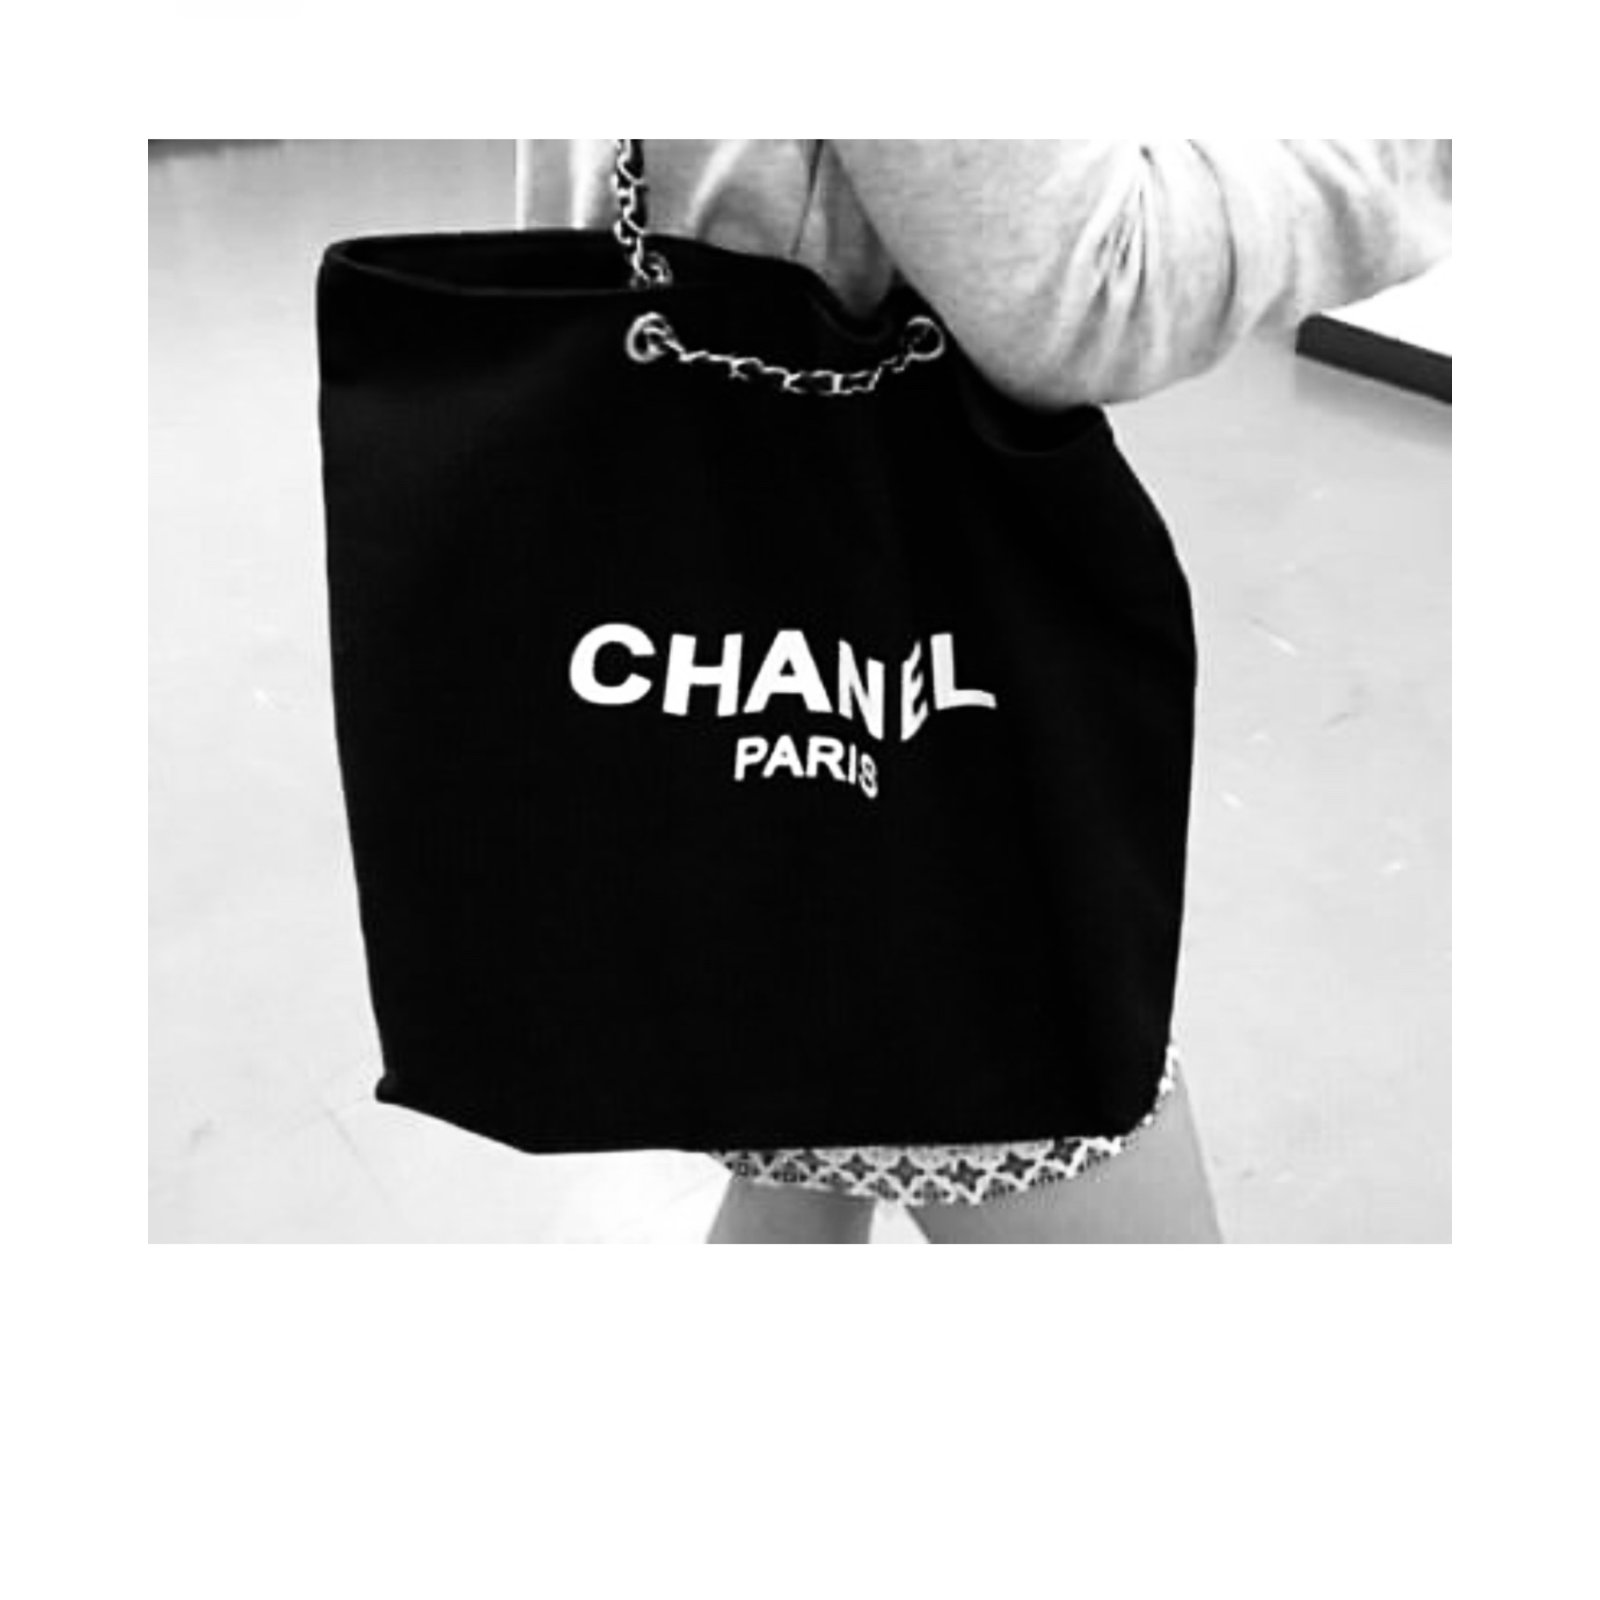 Chanel Black Canvas Tote Shopping Gift Bag